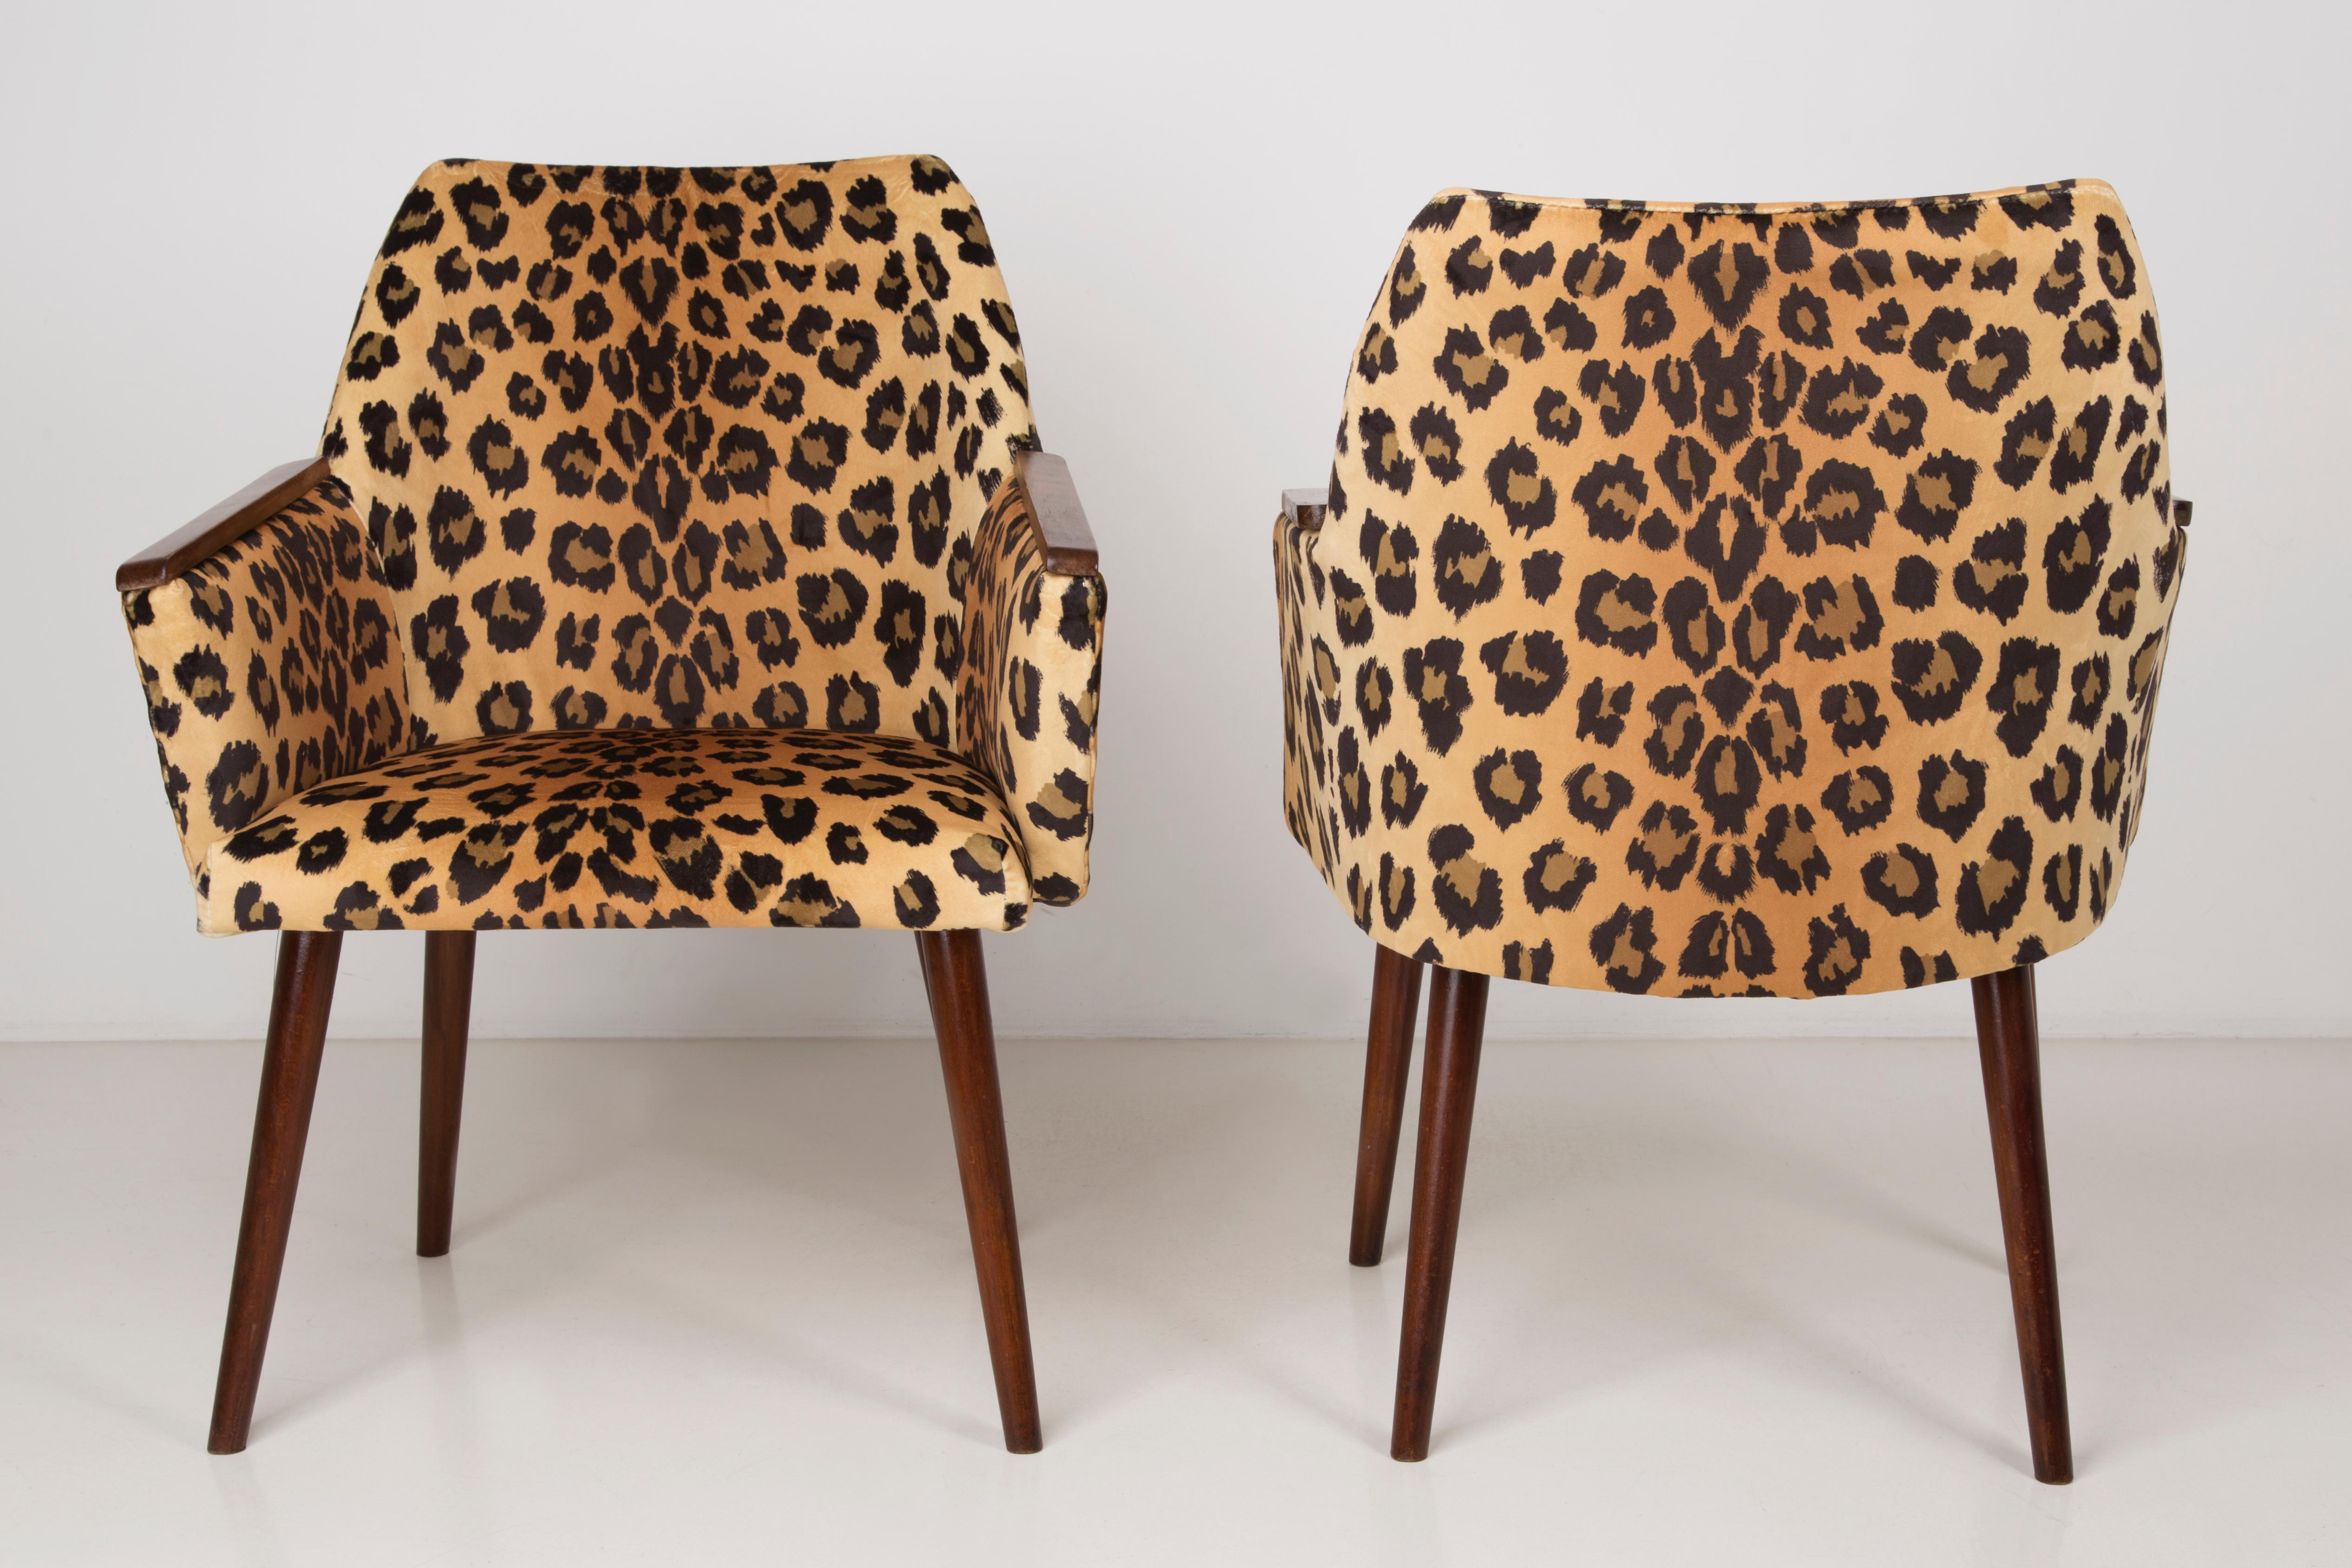 Hand-Crafted Set of Two Mid-Century Modern Leopard Print Chairs, 1960s, Germany